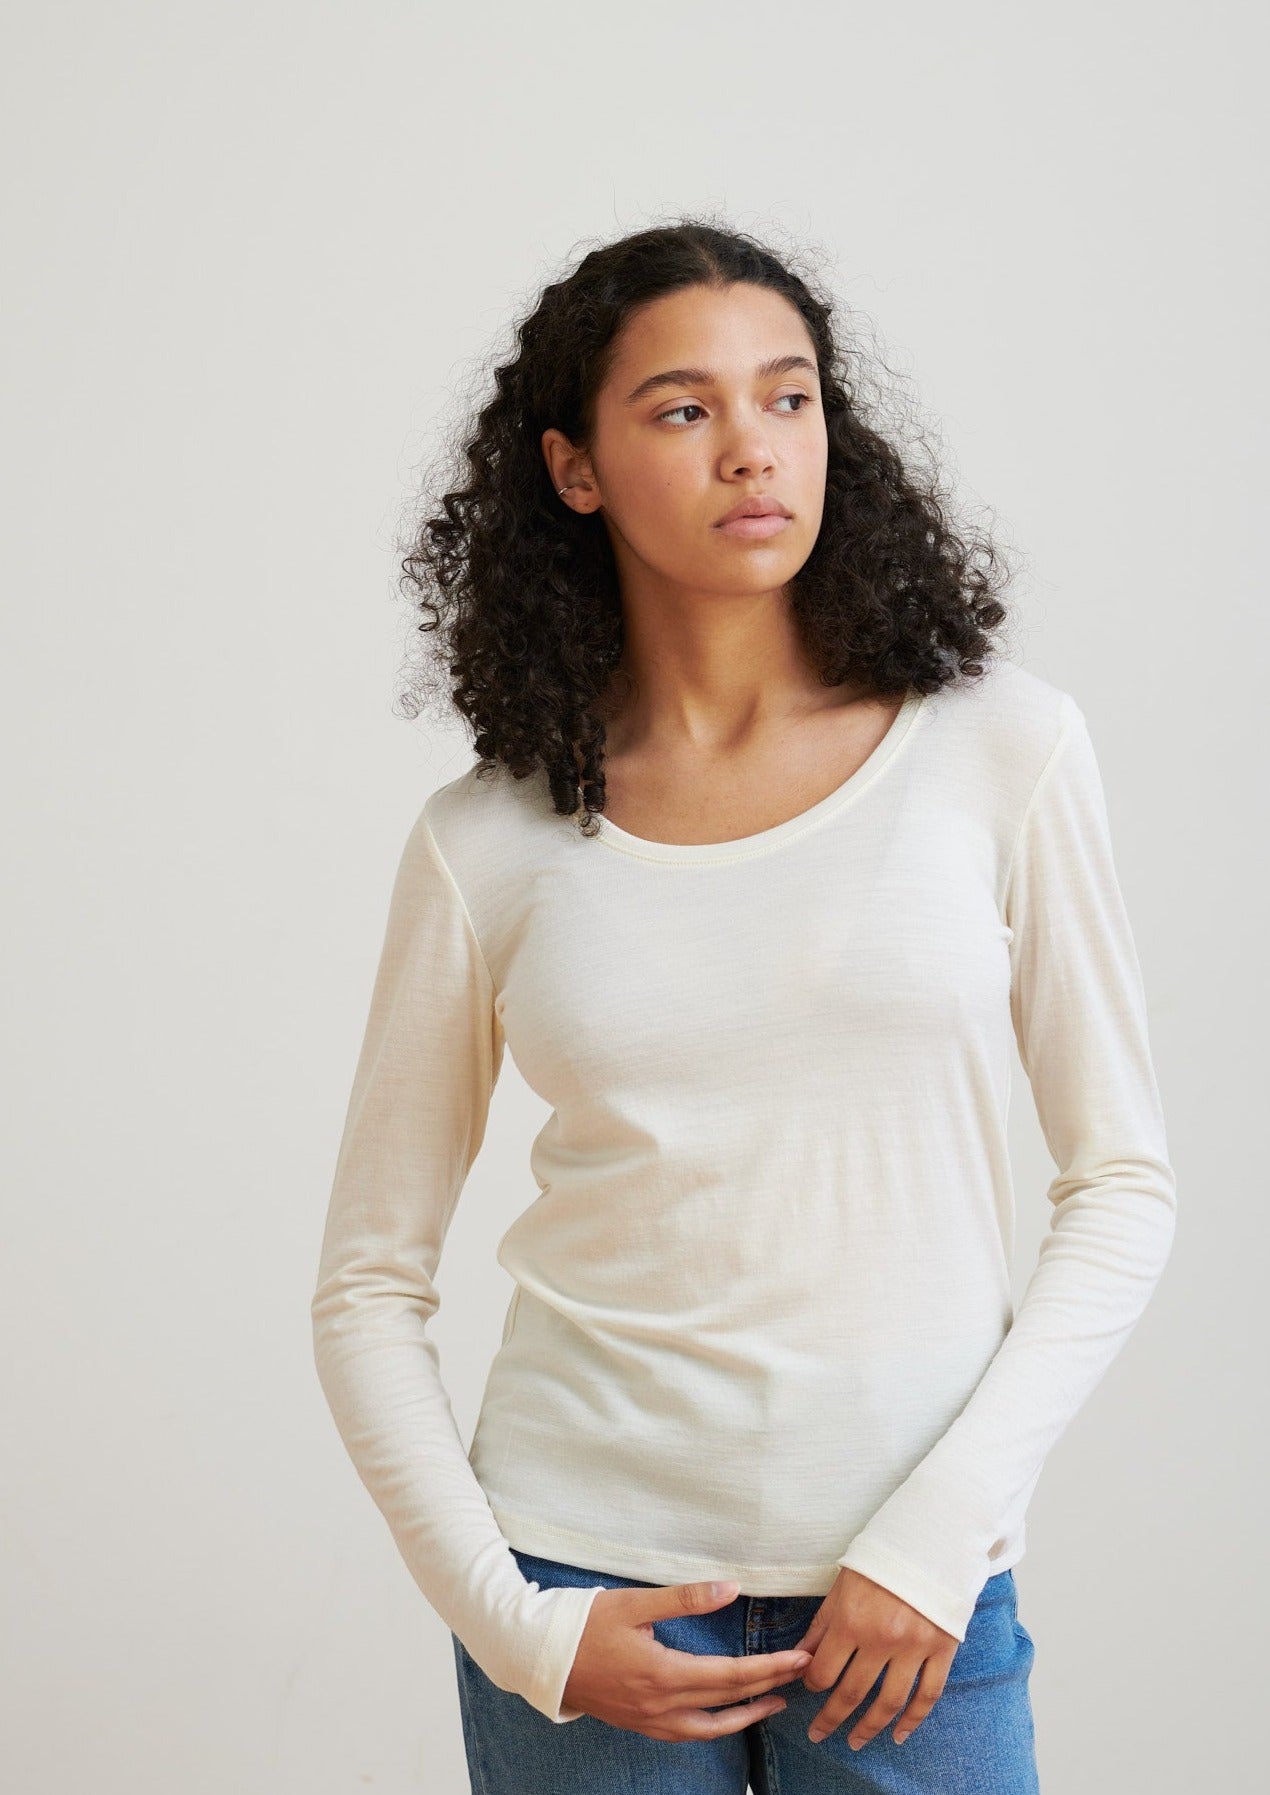 Detailed with a scoop neckline, this layering essential is soft and lightweight to wear all seasons. 